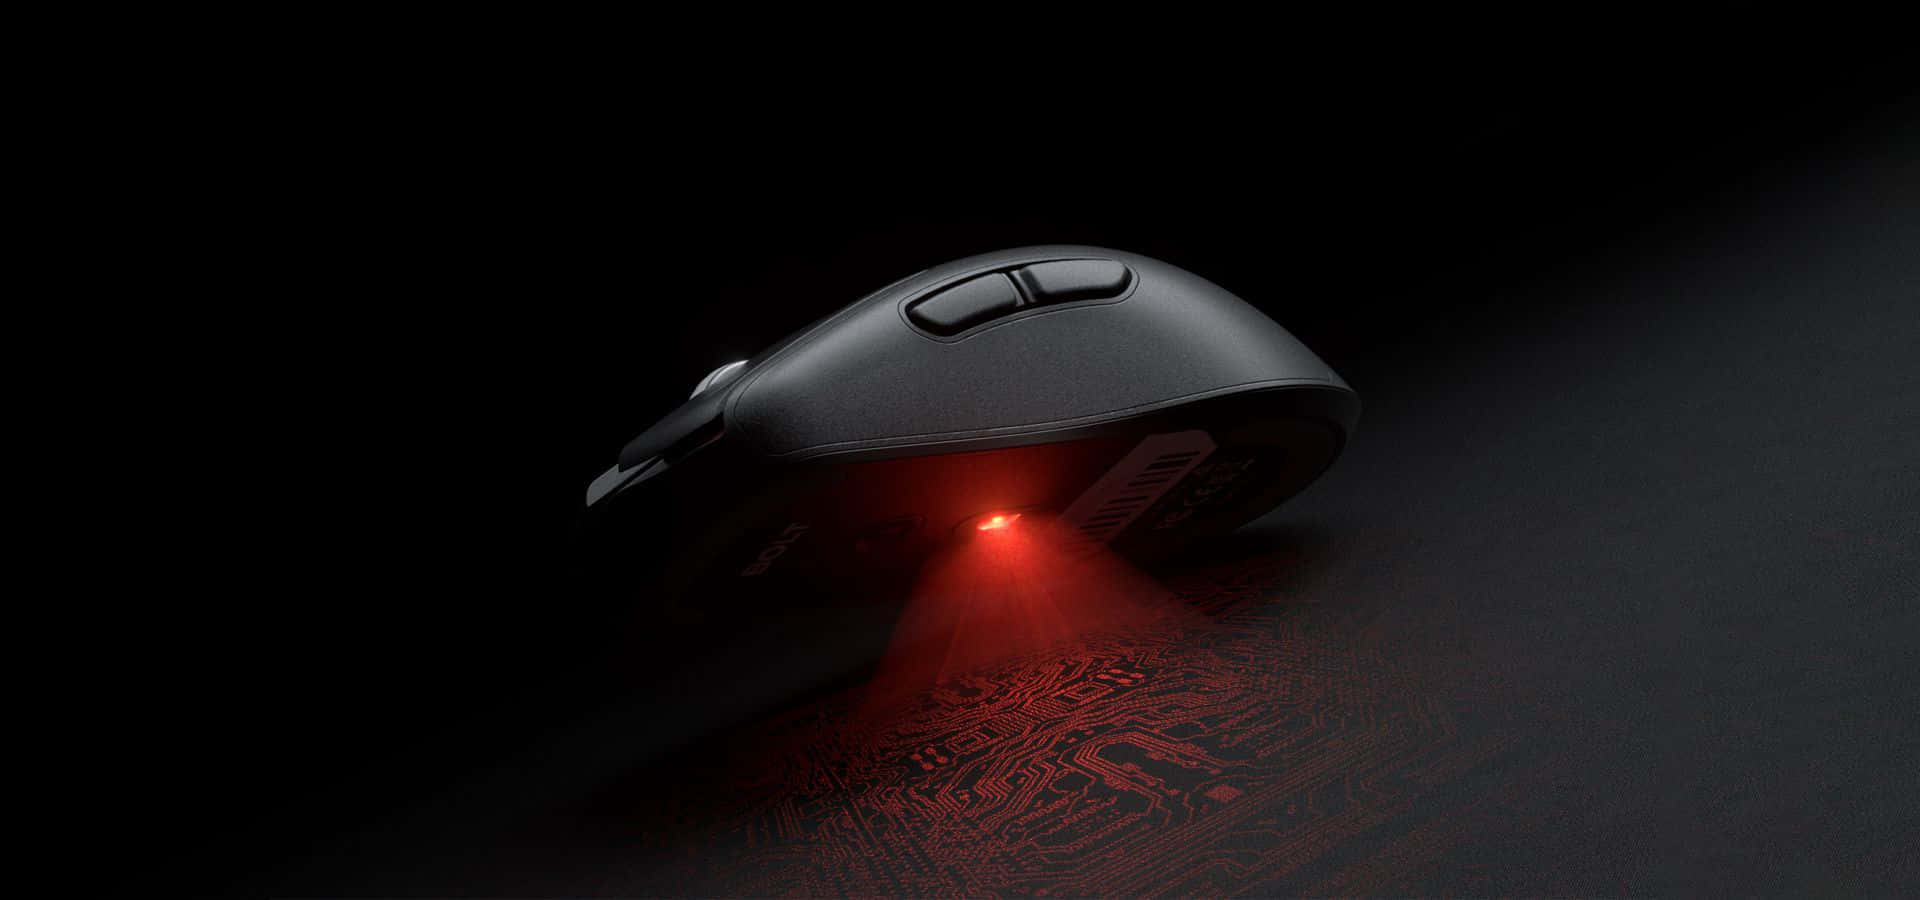 High-performance gaming mouse on a futuristic background Wallpaper